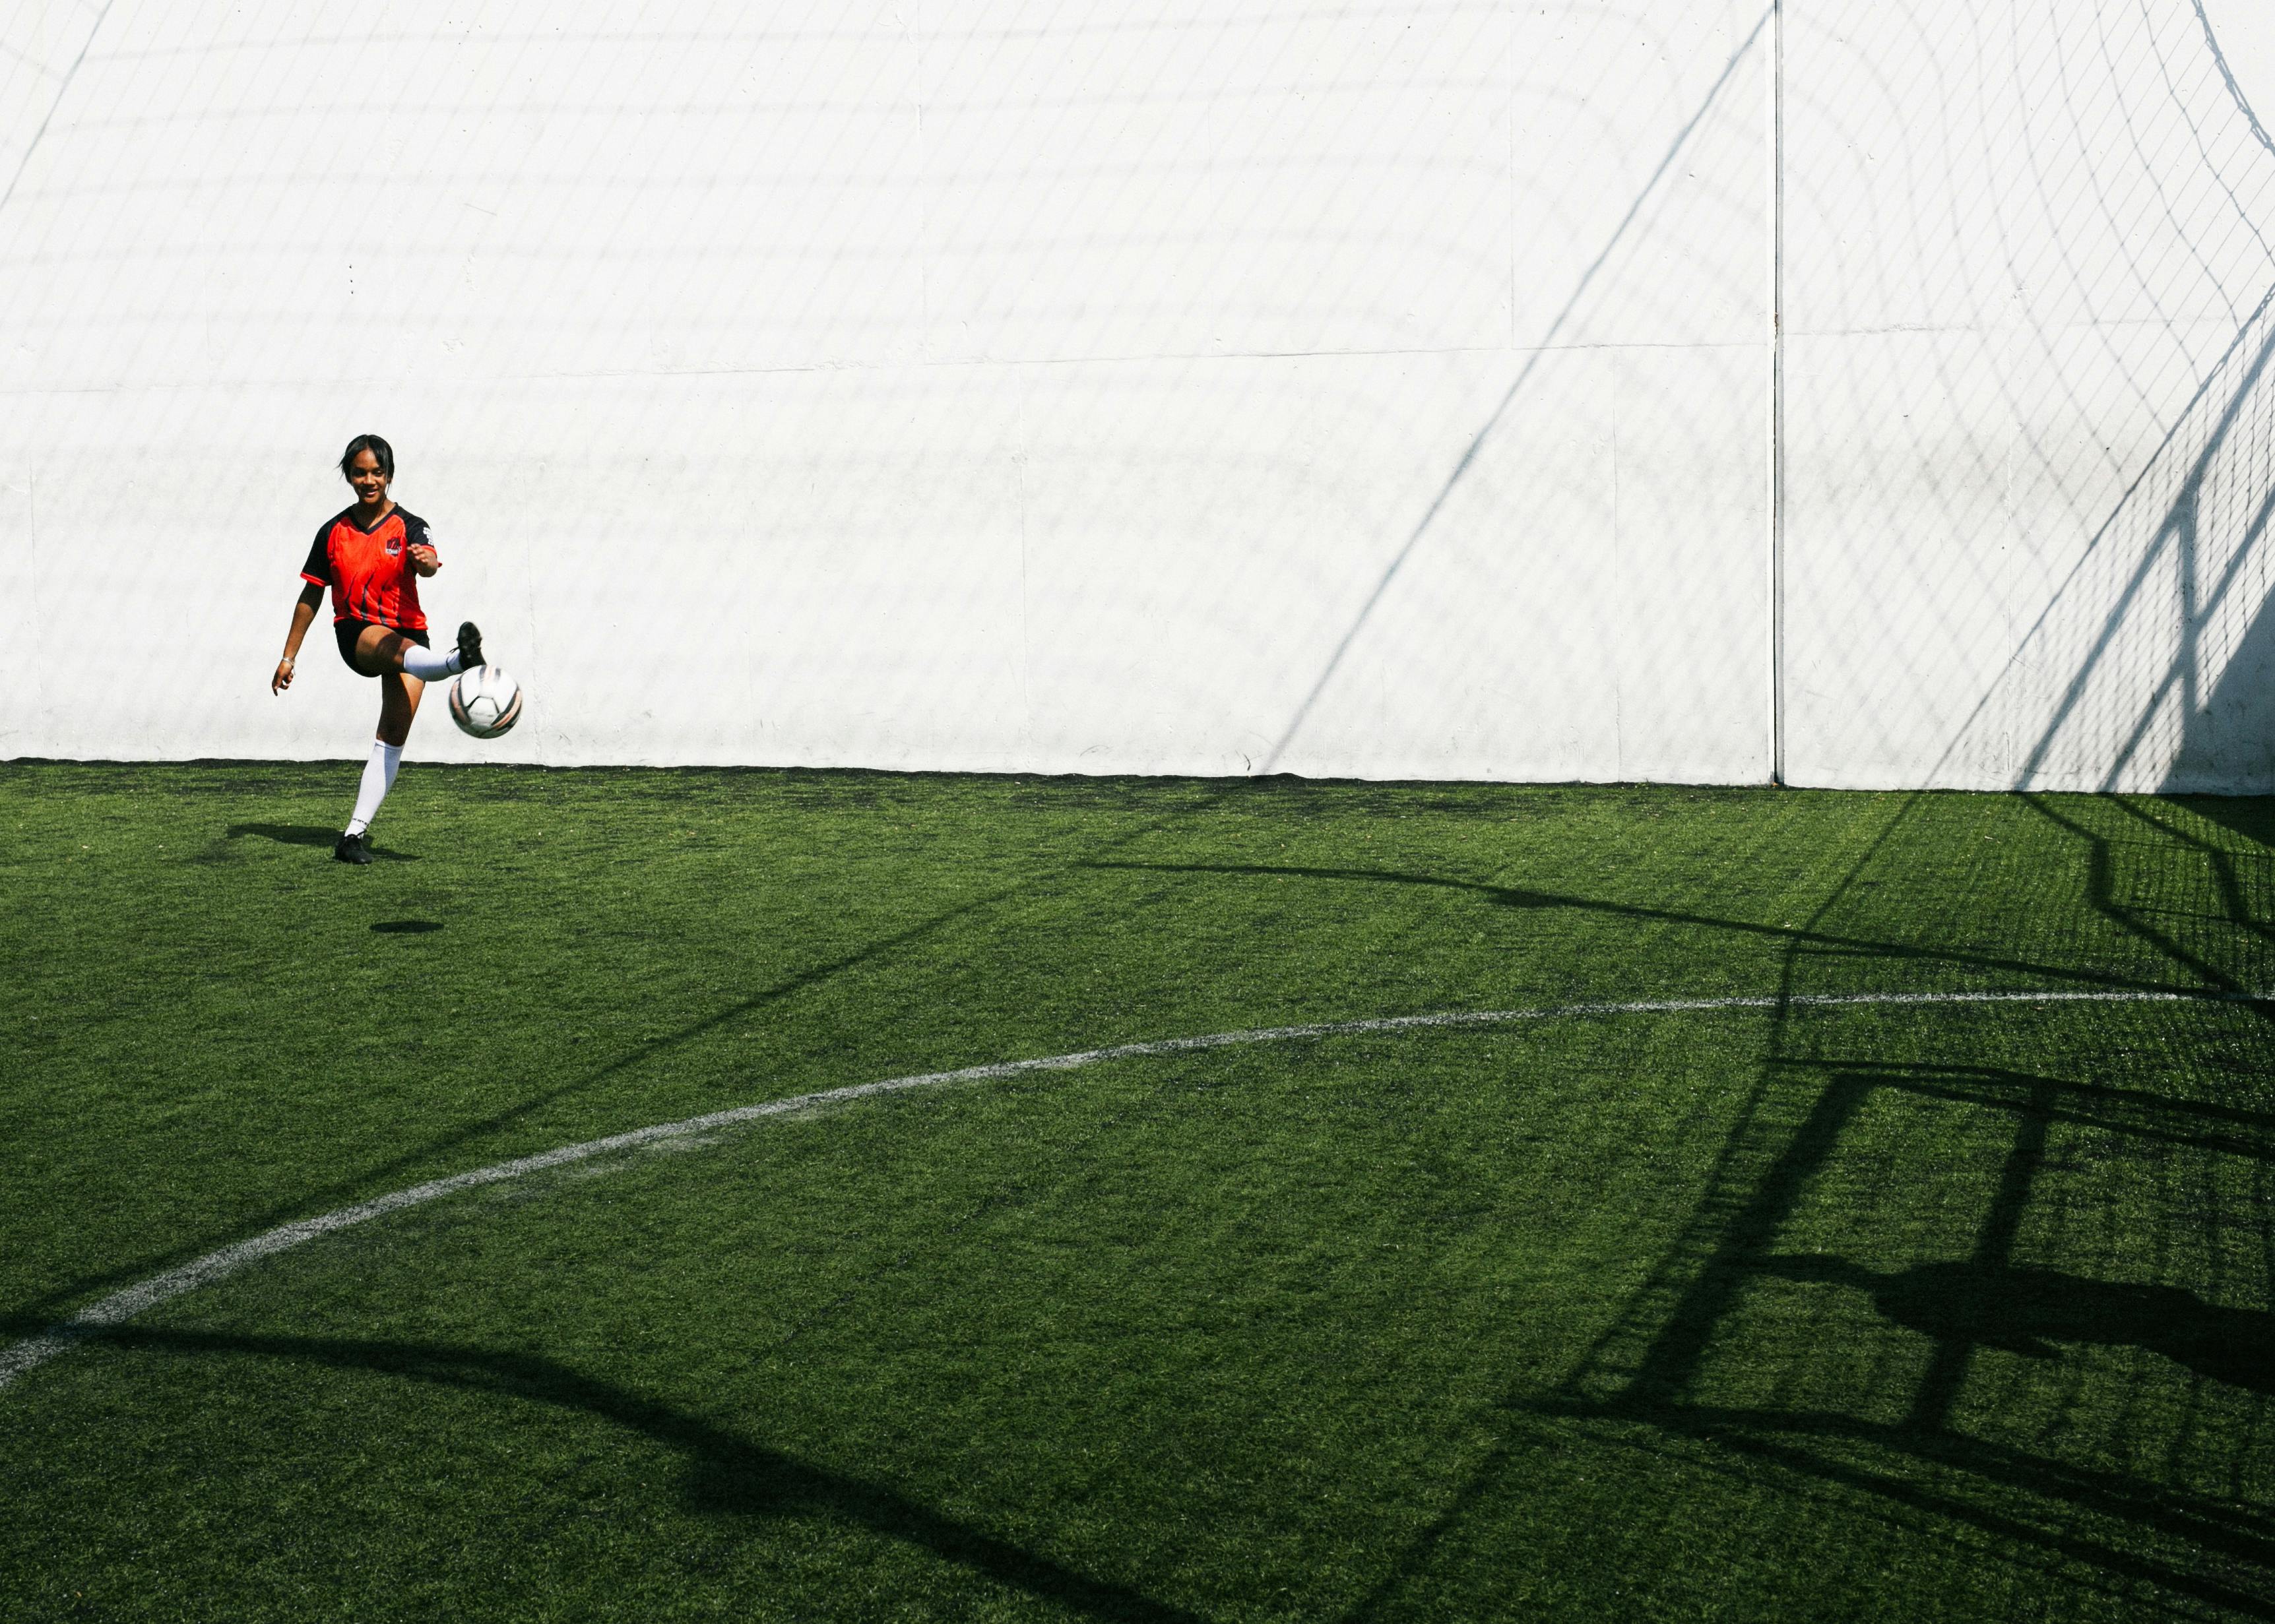 woman soccer player kicking ball in goal